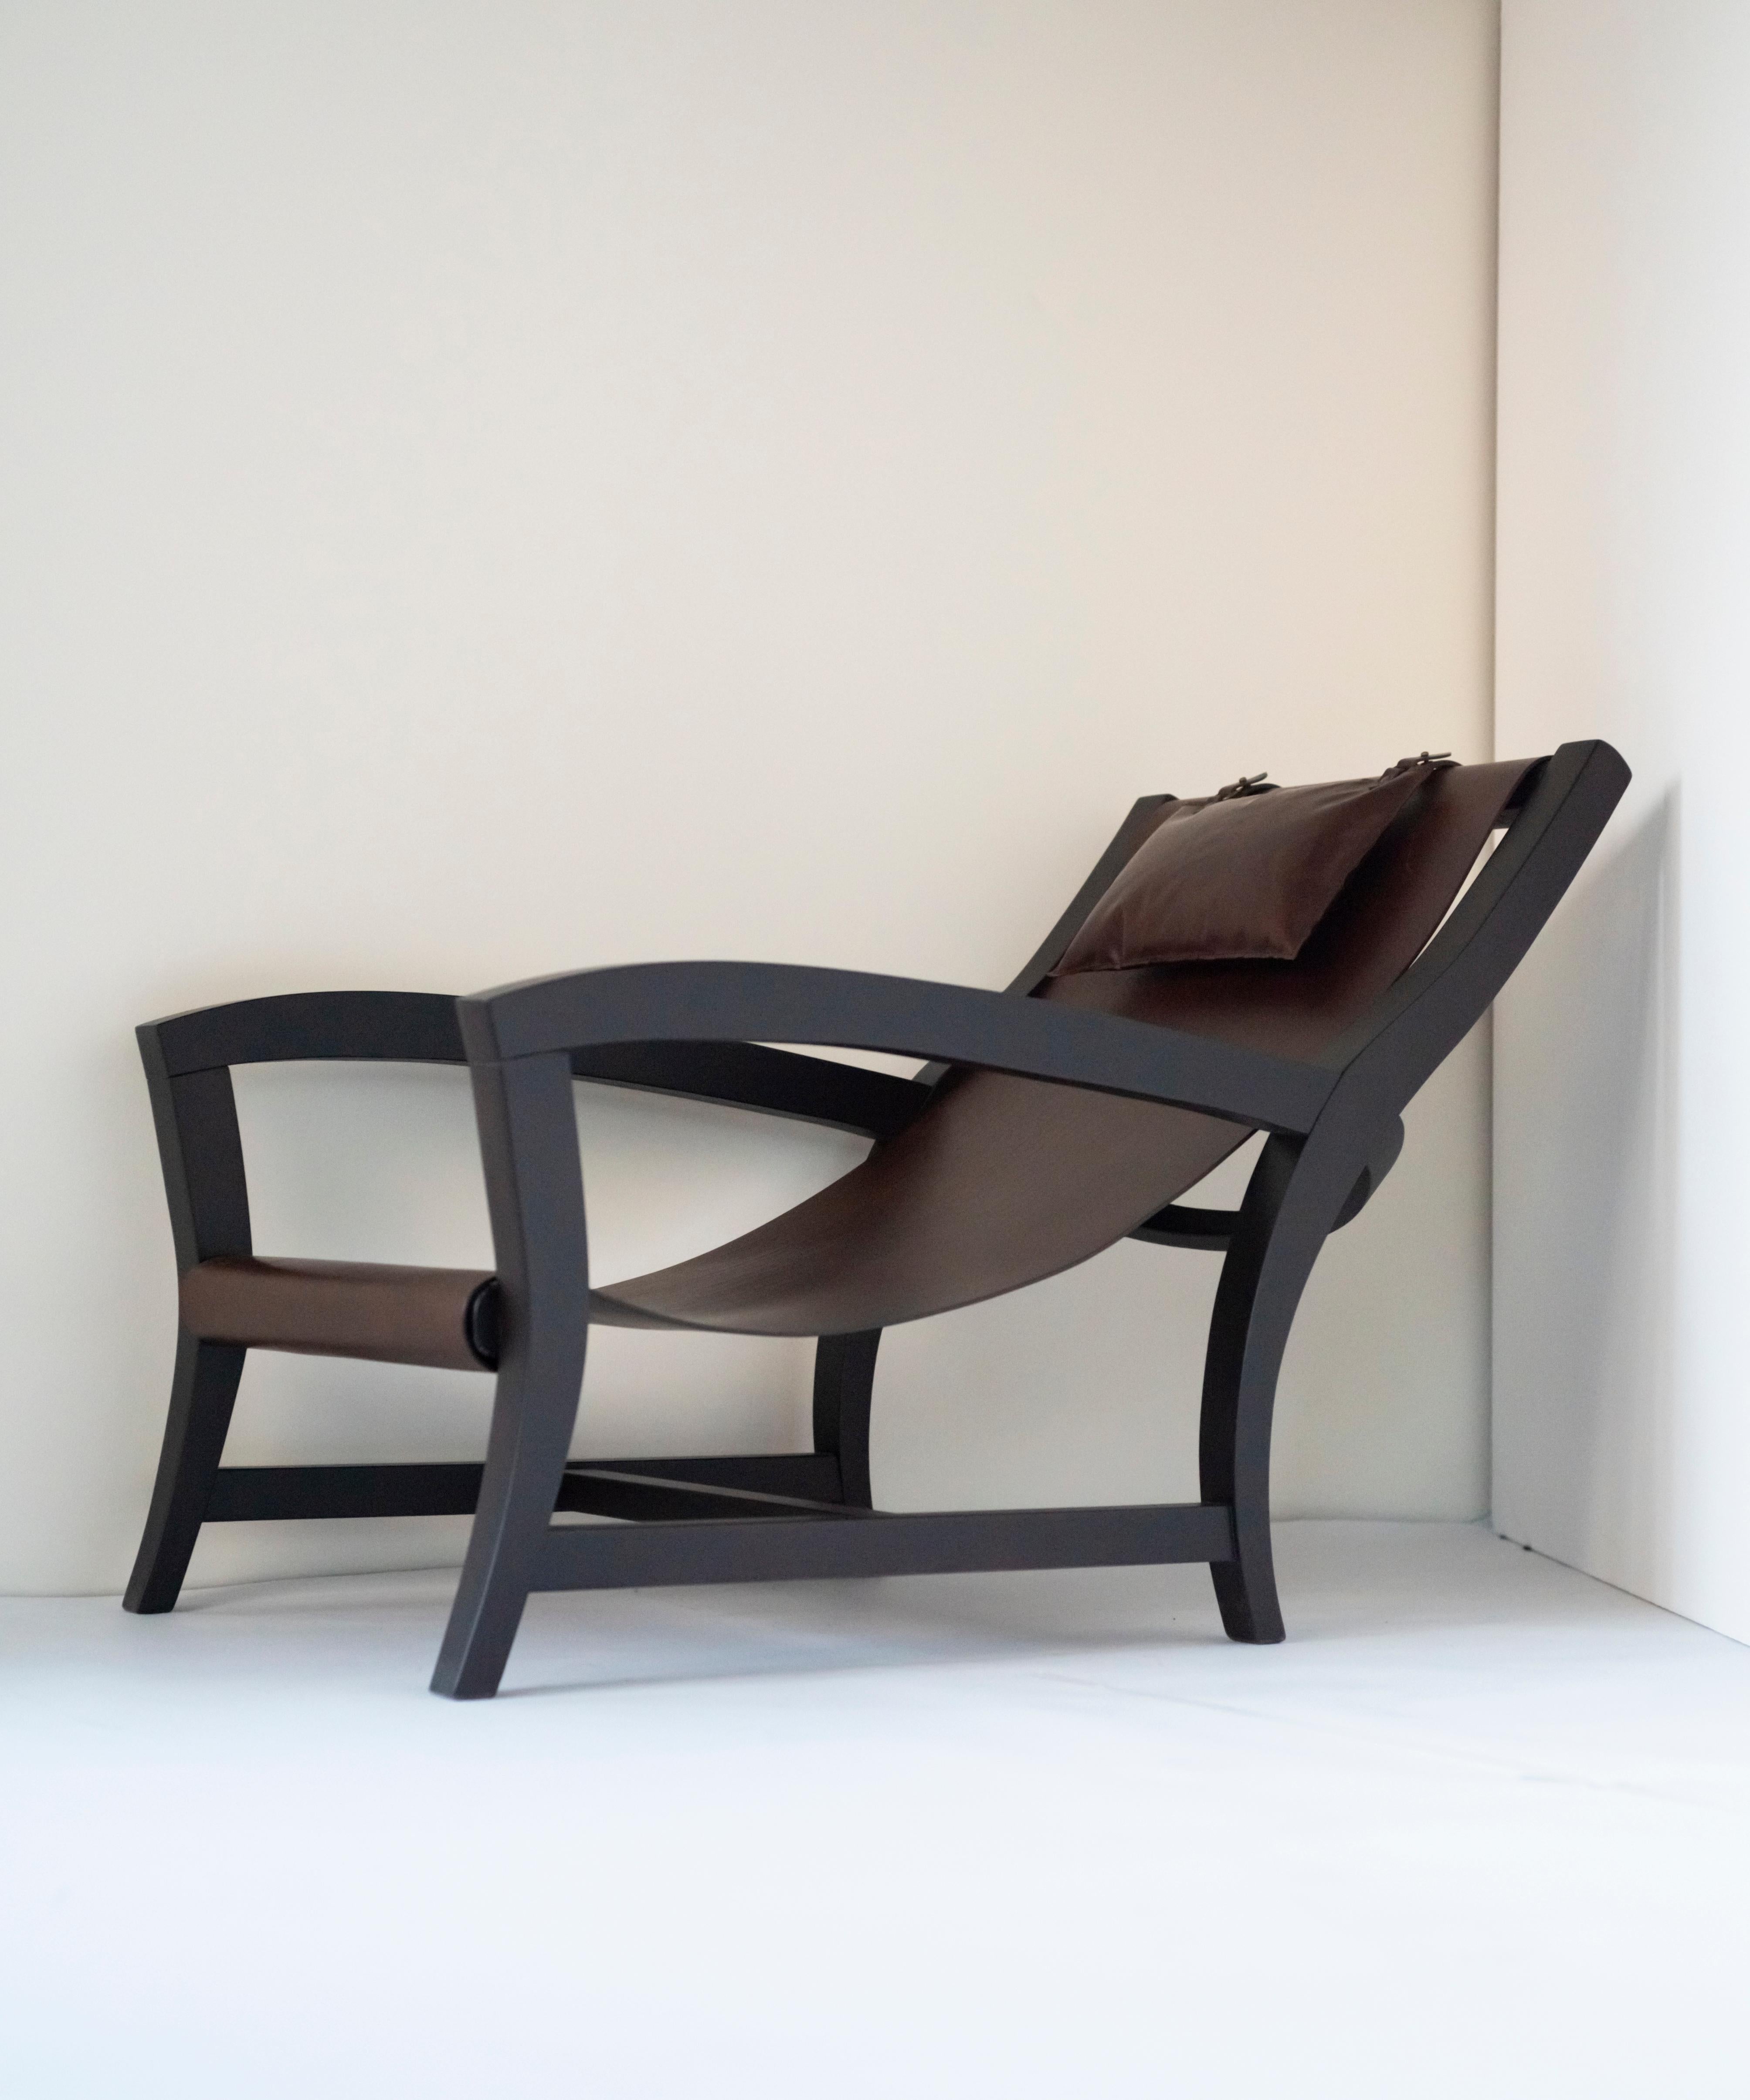 Elba, Deckchair Inspiration for This Leather and Beechwood Indoor Lounge Chair 1